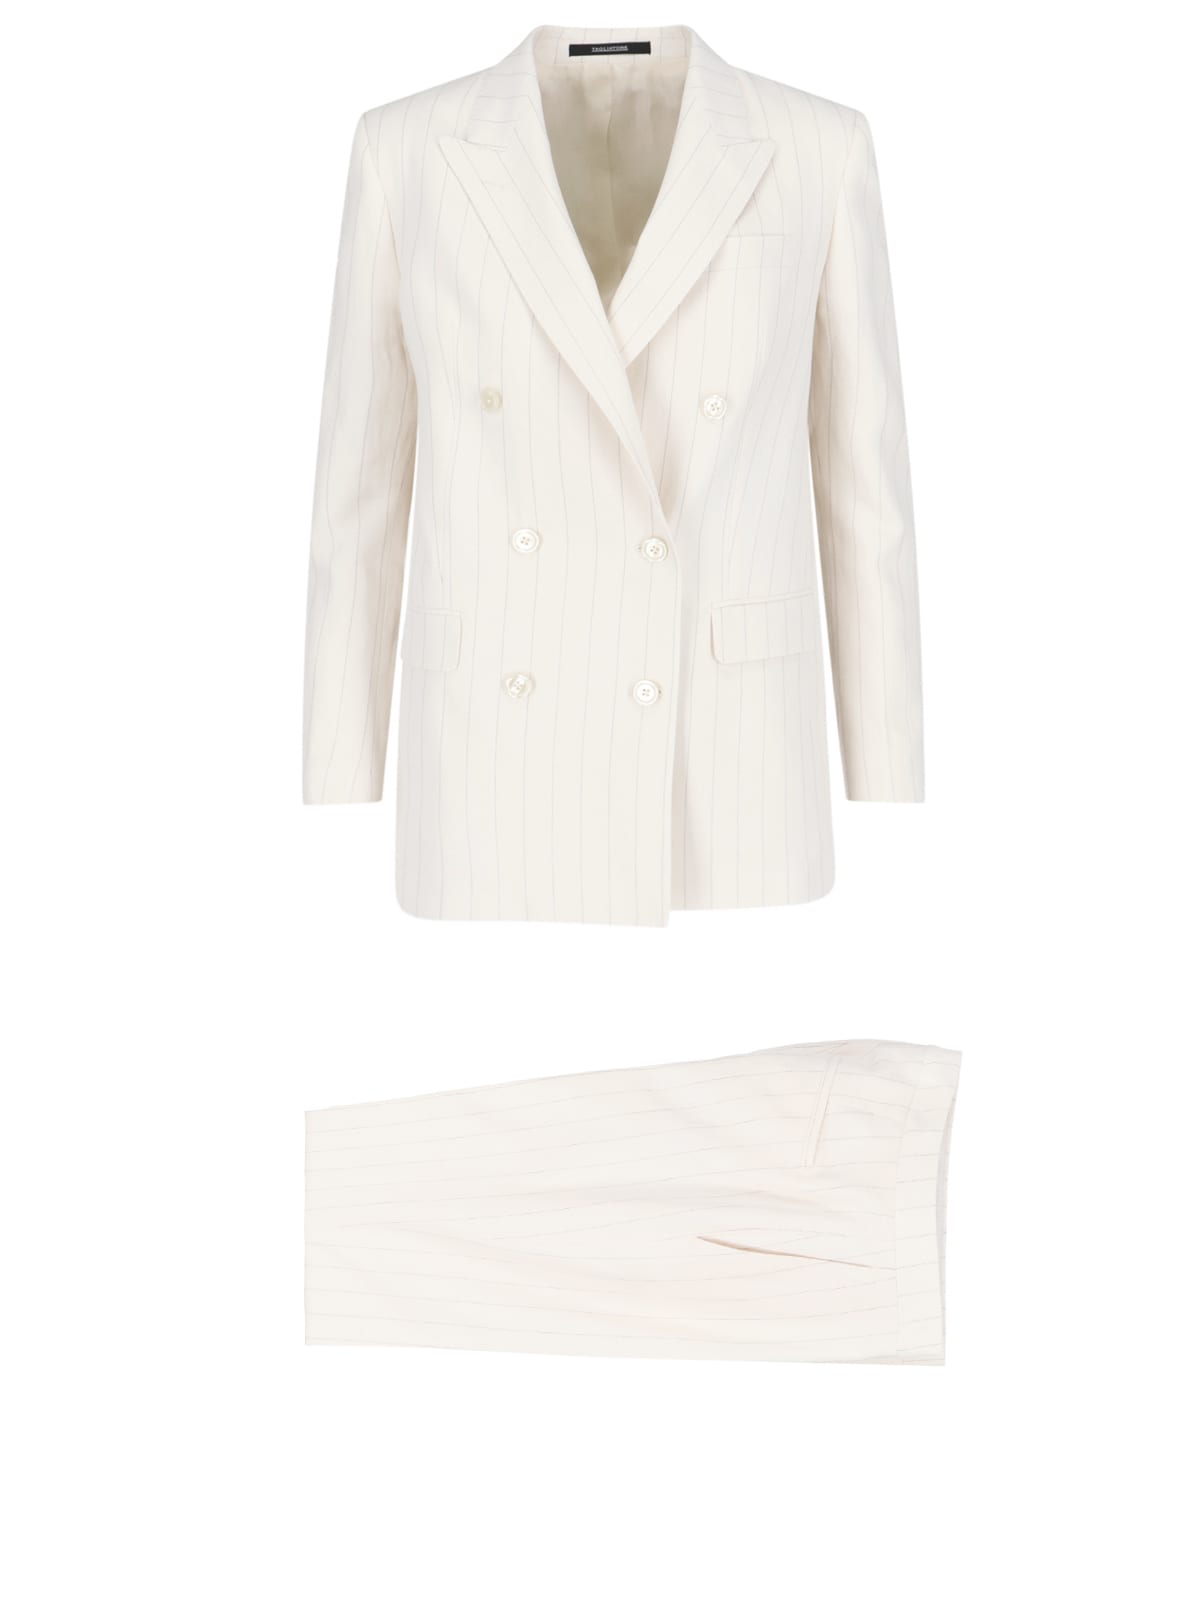 Tagliatore Double-breasted Suit In Neutral